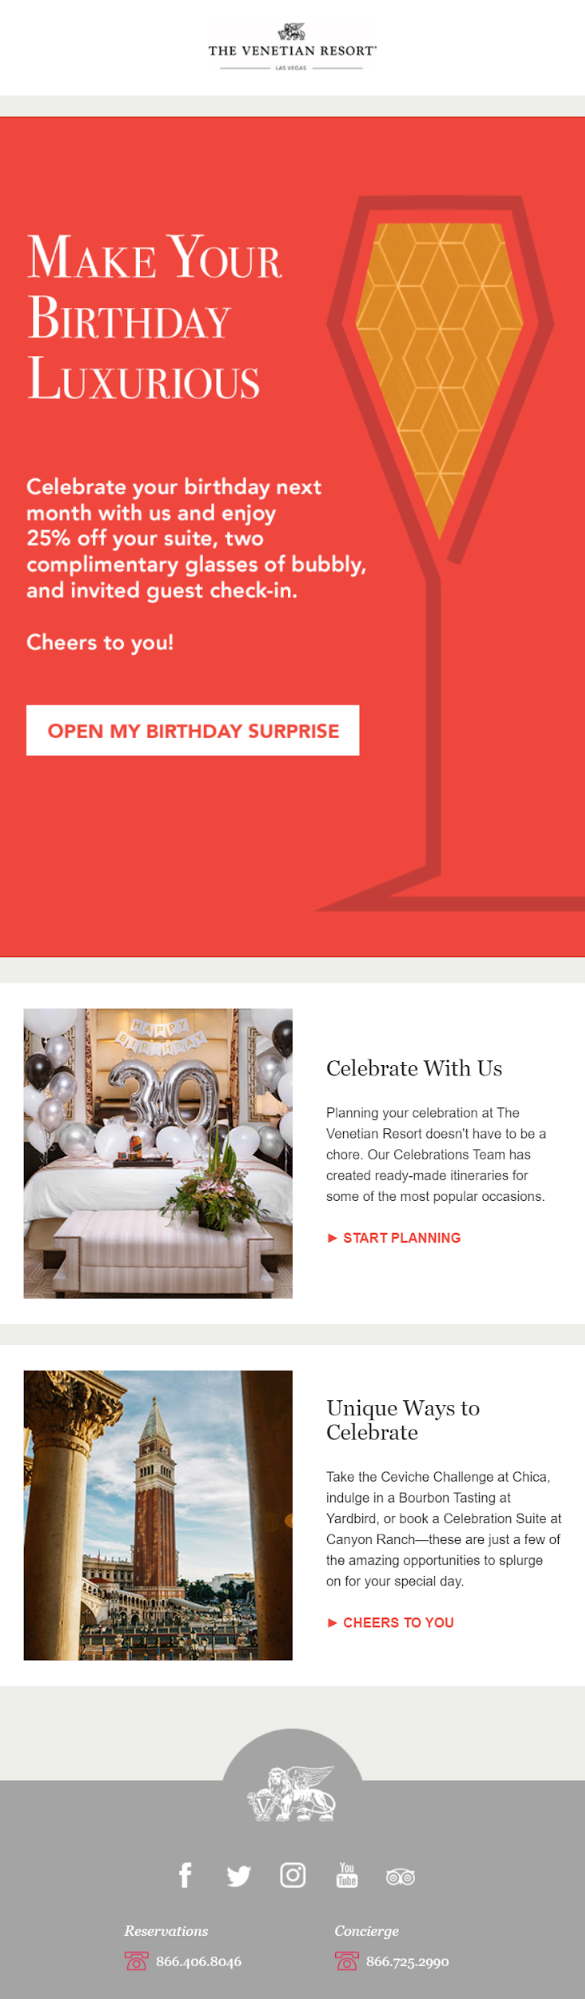 anniversary email campaign by The Venetian